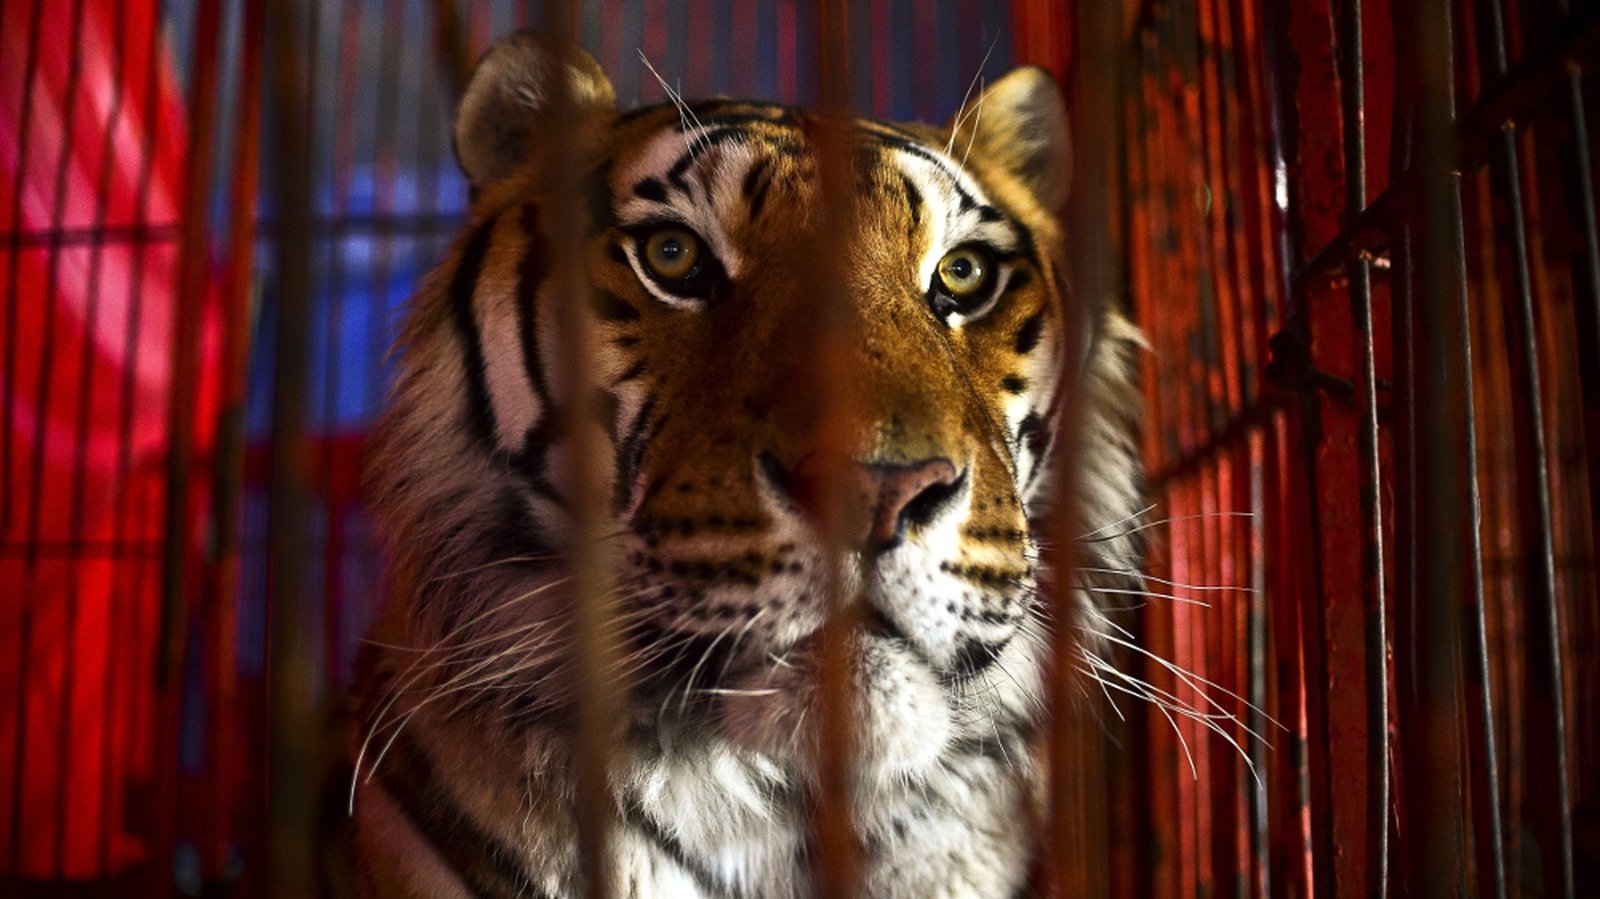 Circuses banned from using wild animals from 2018